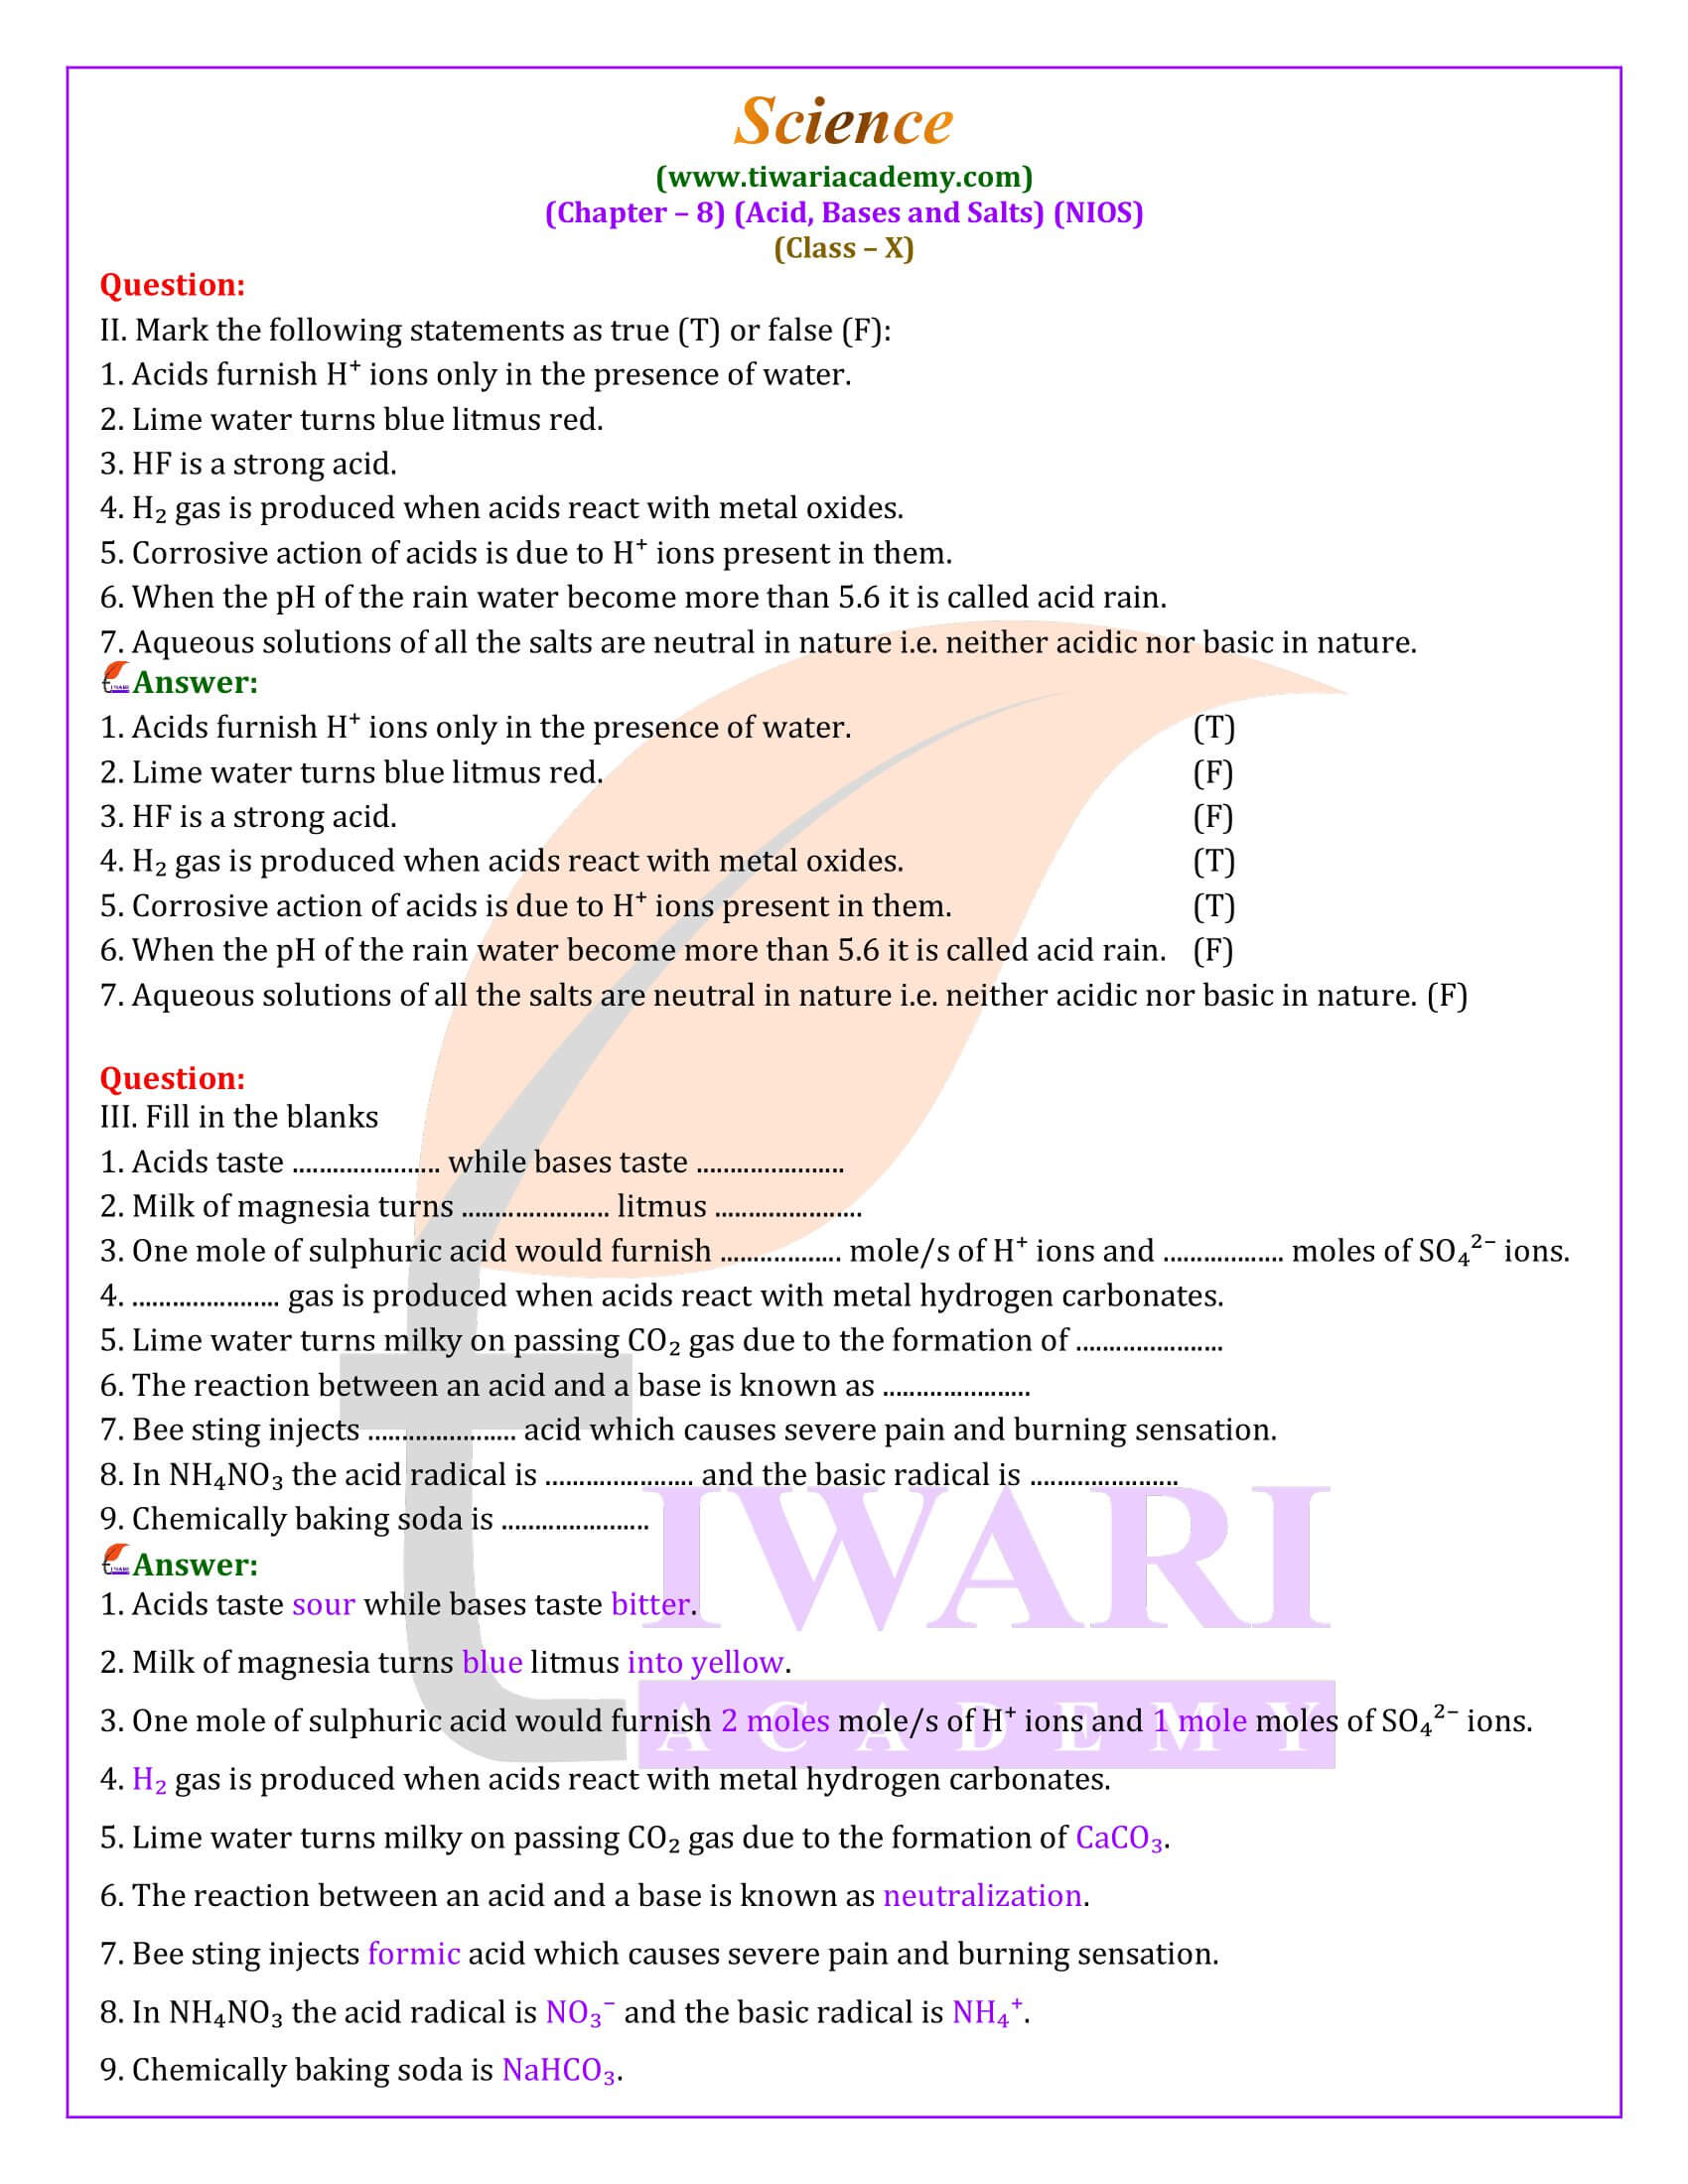 NIOS Class 10 Science Chapter 8 Solutions in English